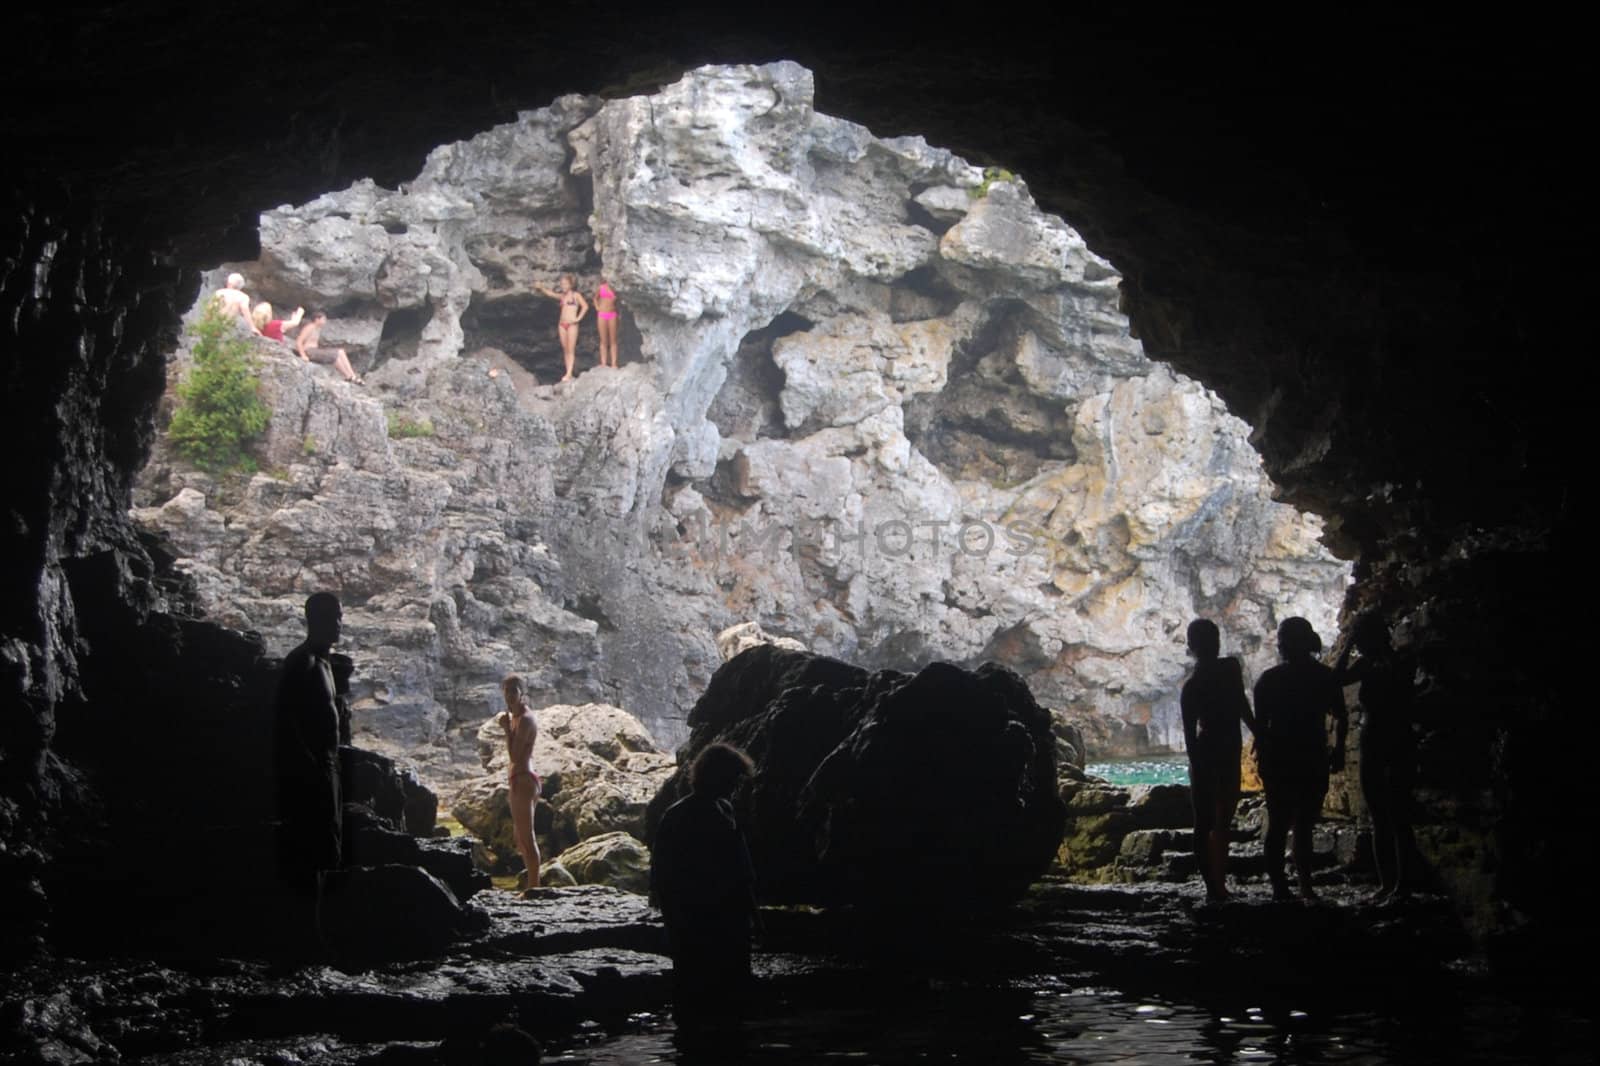 Swimmers at the Grotto Cave by tyroneburkemedia@gmail.com